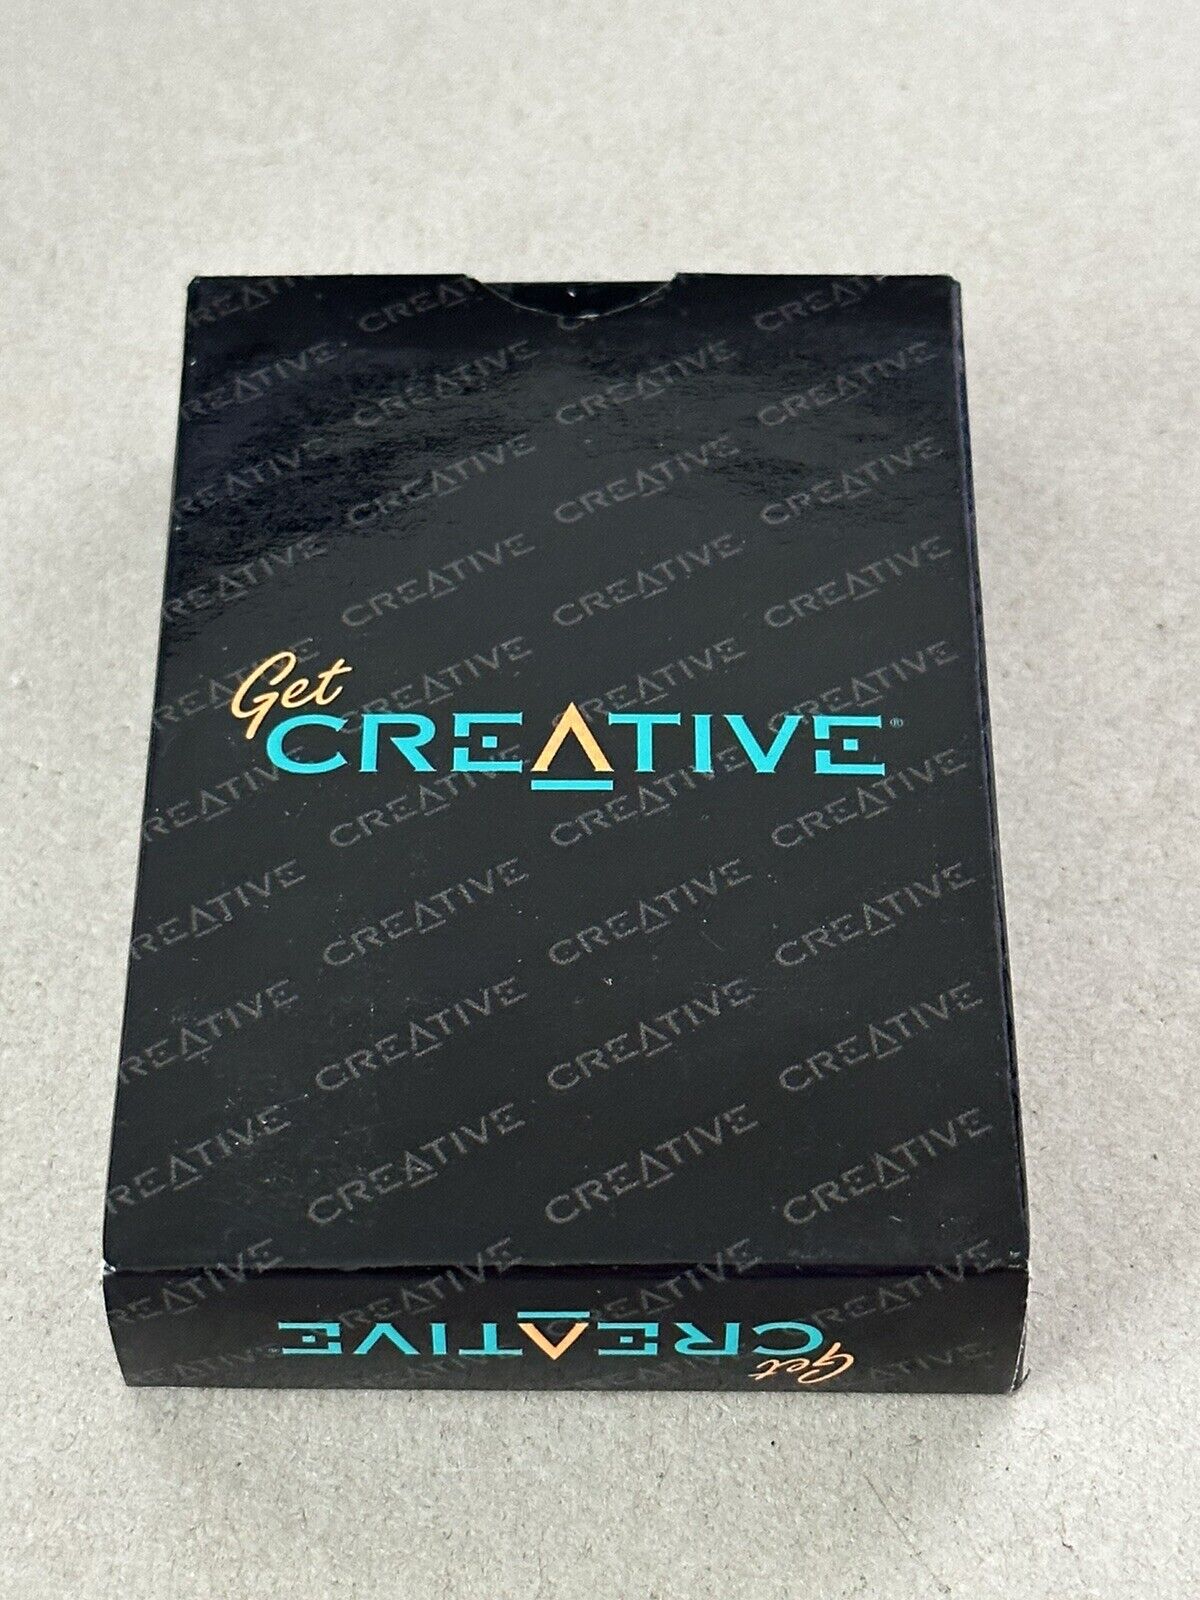 CREATIVE LABS Playing Cards Promotional Advertising Rare - BRAND NEW & SEALED